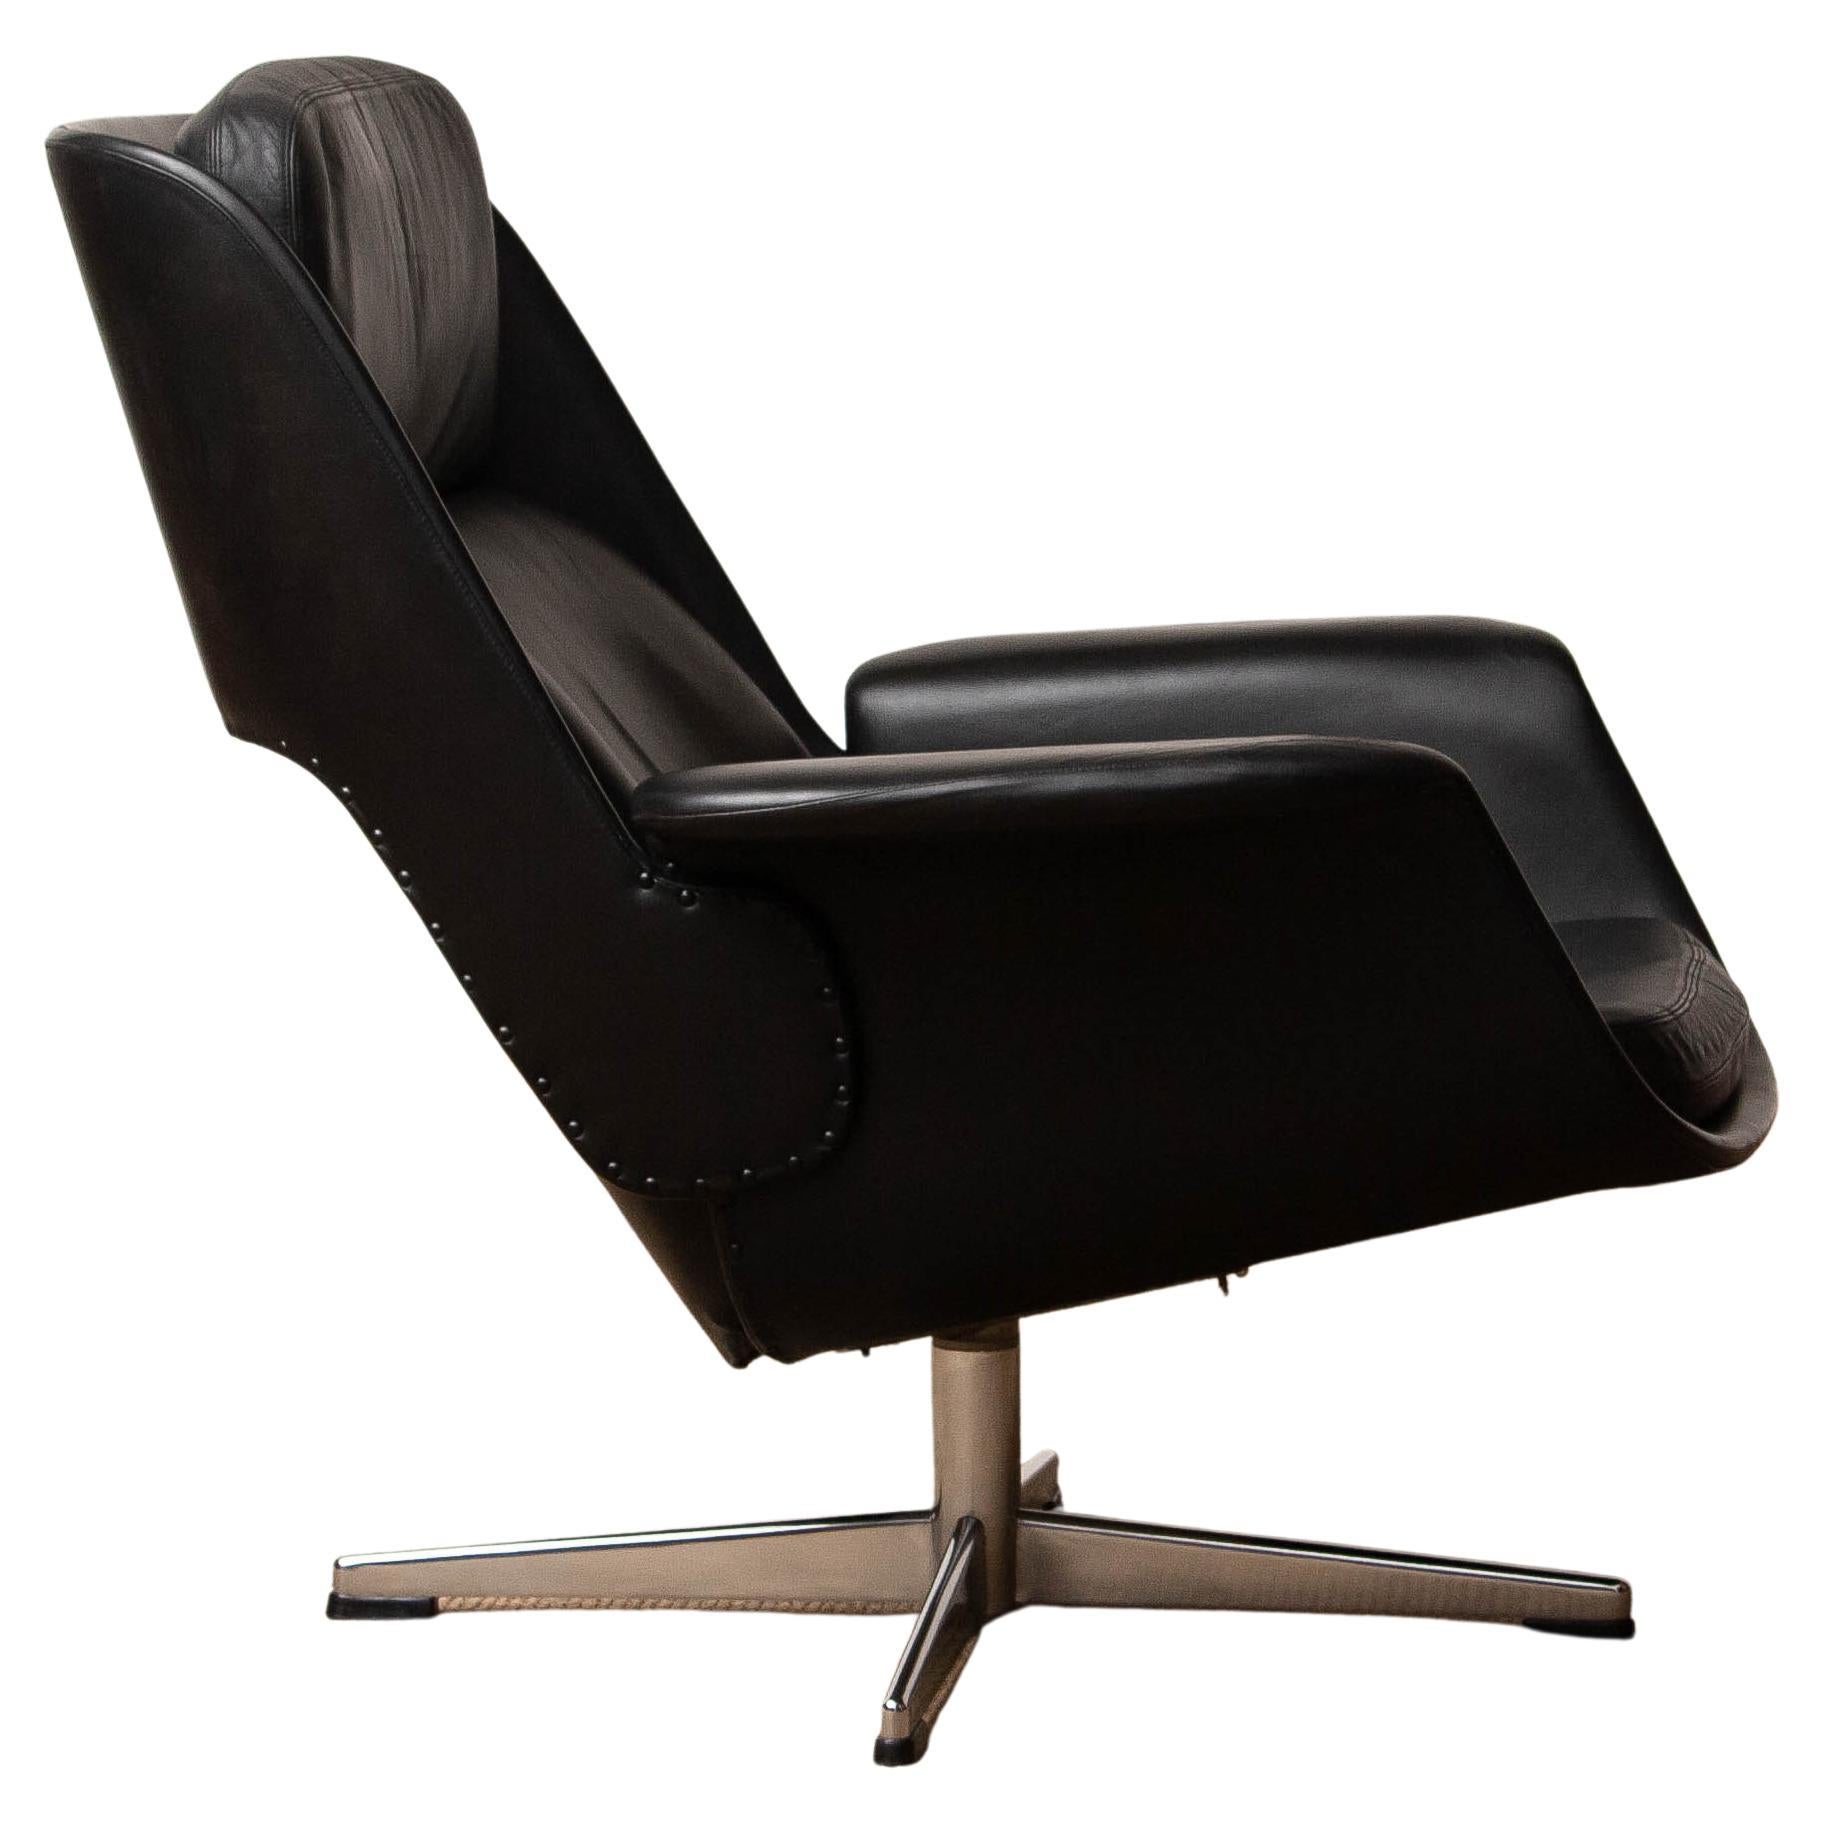 1960's Black Leather 'Rondo' Swivel Chair Designed by Olli Borg for Asko  Finland For Sale at 1stDibs